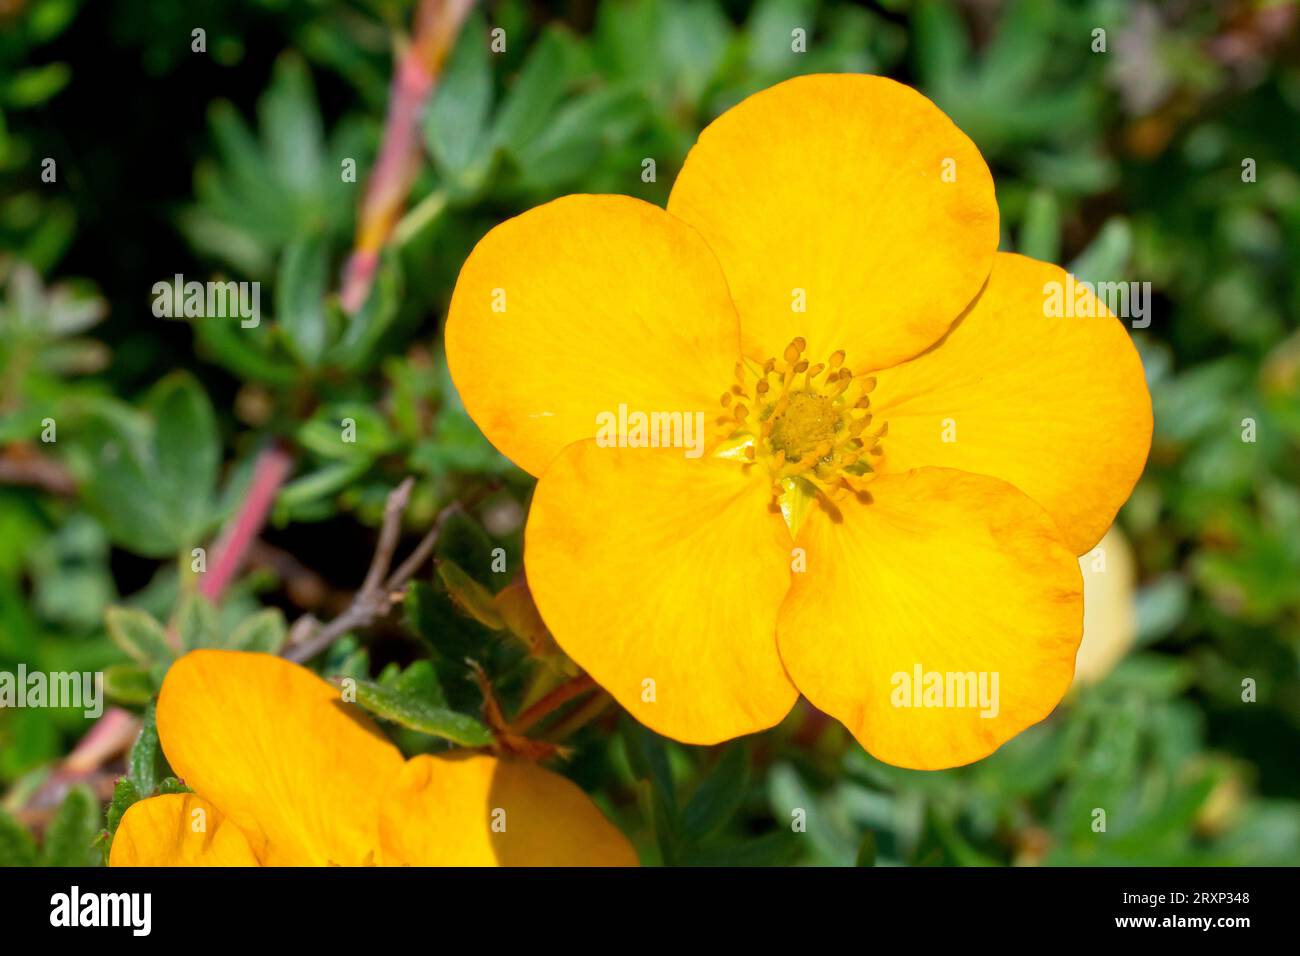 Shrubby Cinquefoil (potentilla fruticosa), possibly cultivar Bella Sol, close up showing the yellow-orange flowers of the commonly planted shrub. Stock Photo